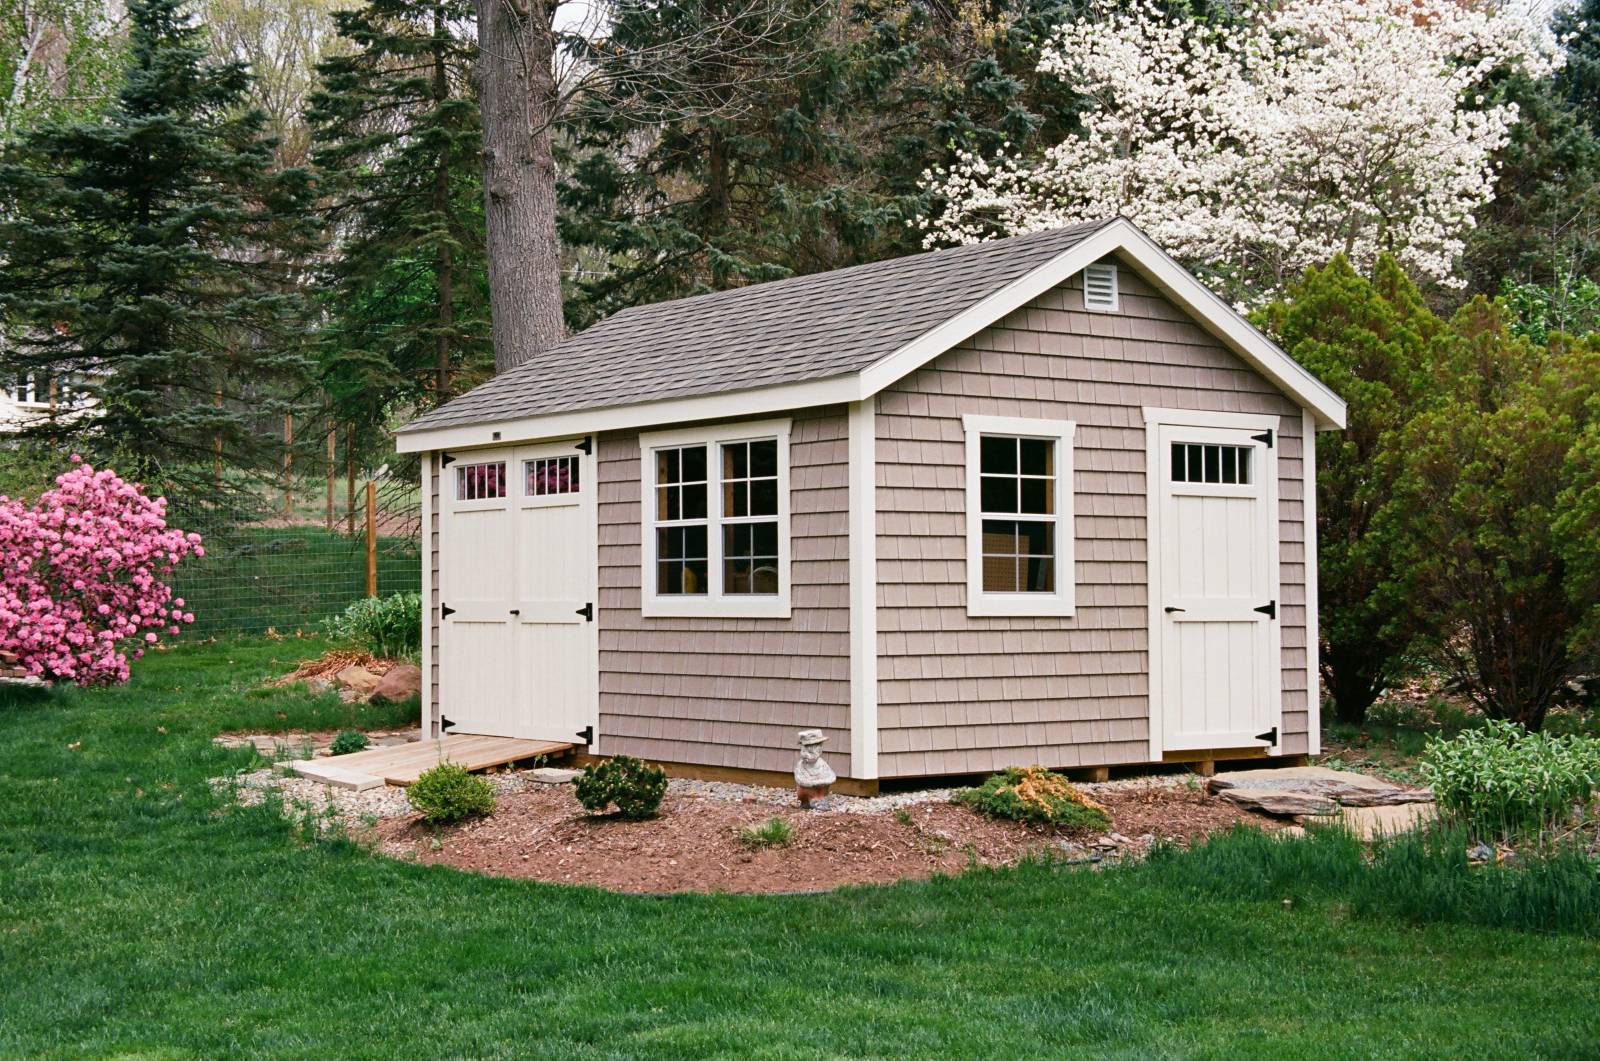 Angle Showing 3' Single Door with Transom Window • Upgraded MiraTEC Trim • 6"³ Overhangs • A Beautiful Garden Shed!